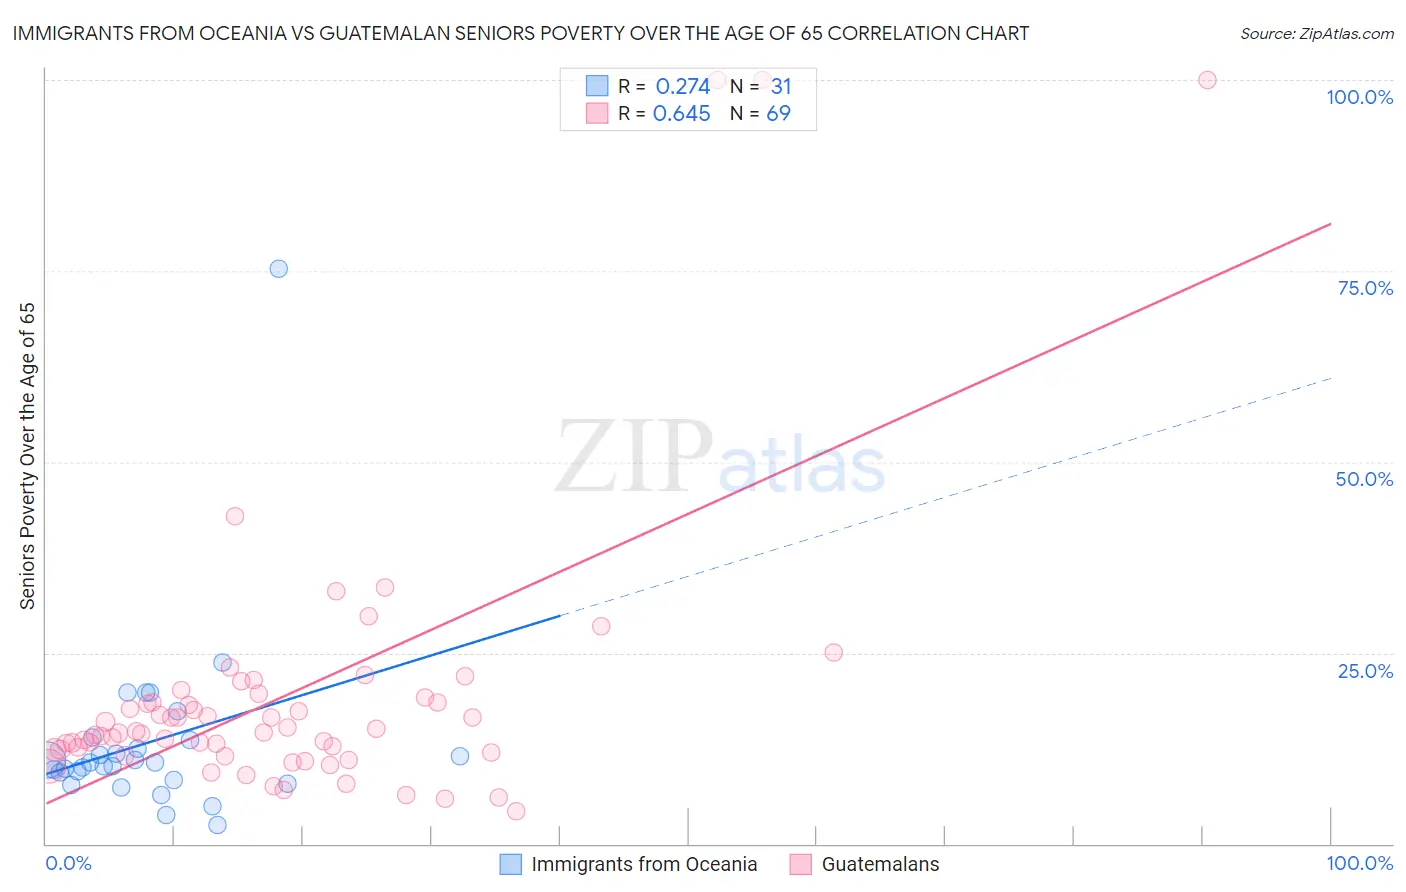 Immigrants from Oceania vs Guatemalan Seniors Poverty Over the Age of 65